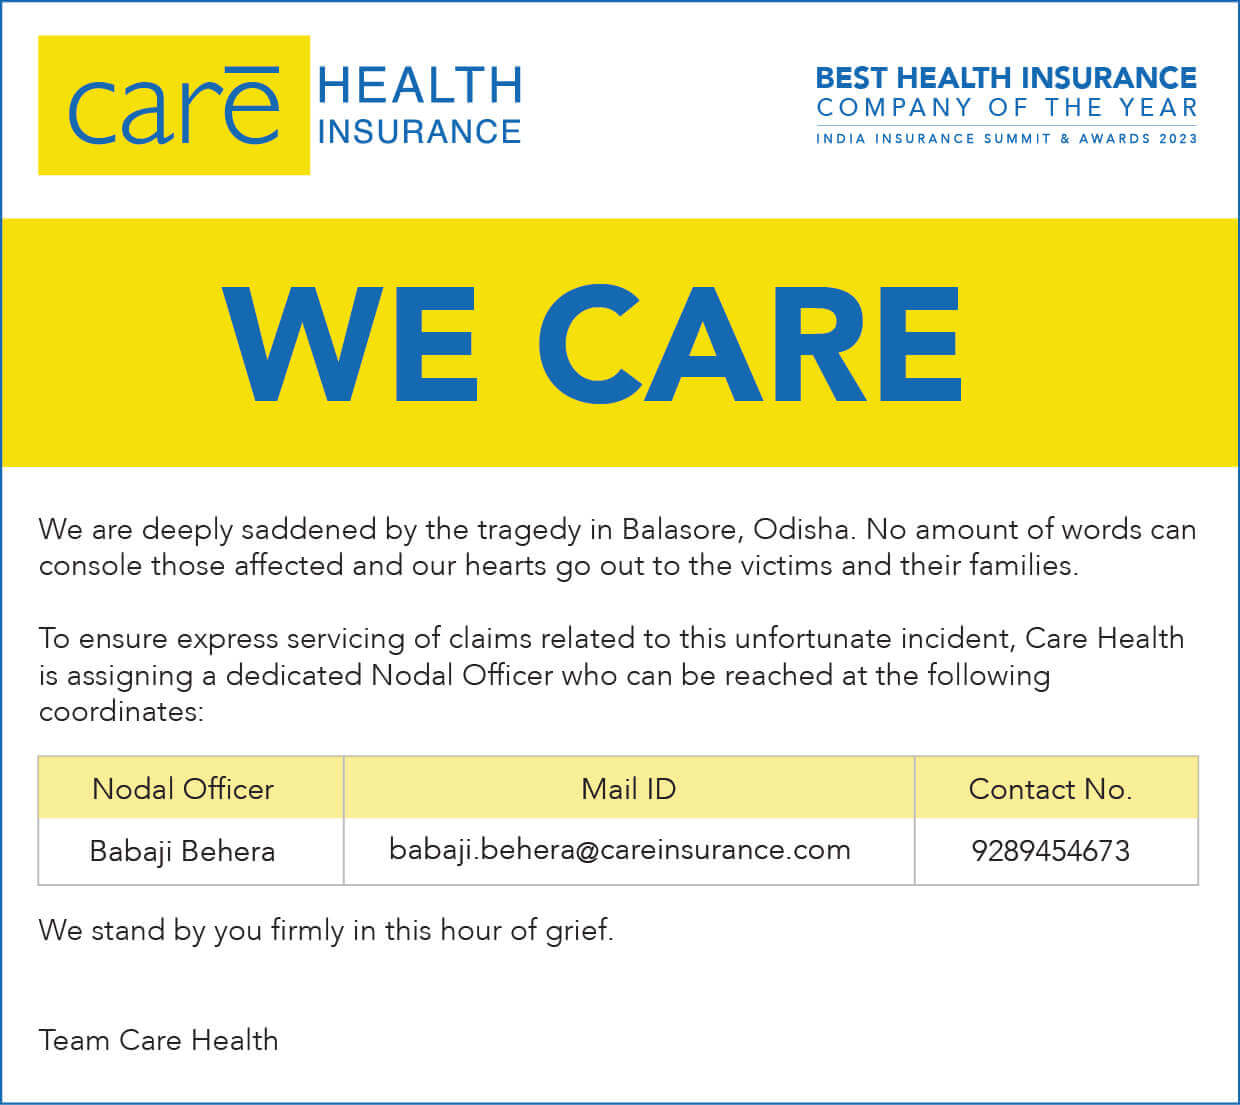 Best Health and Travel Insurance Company in India - Care Insurance